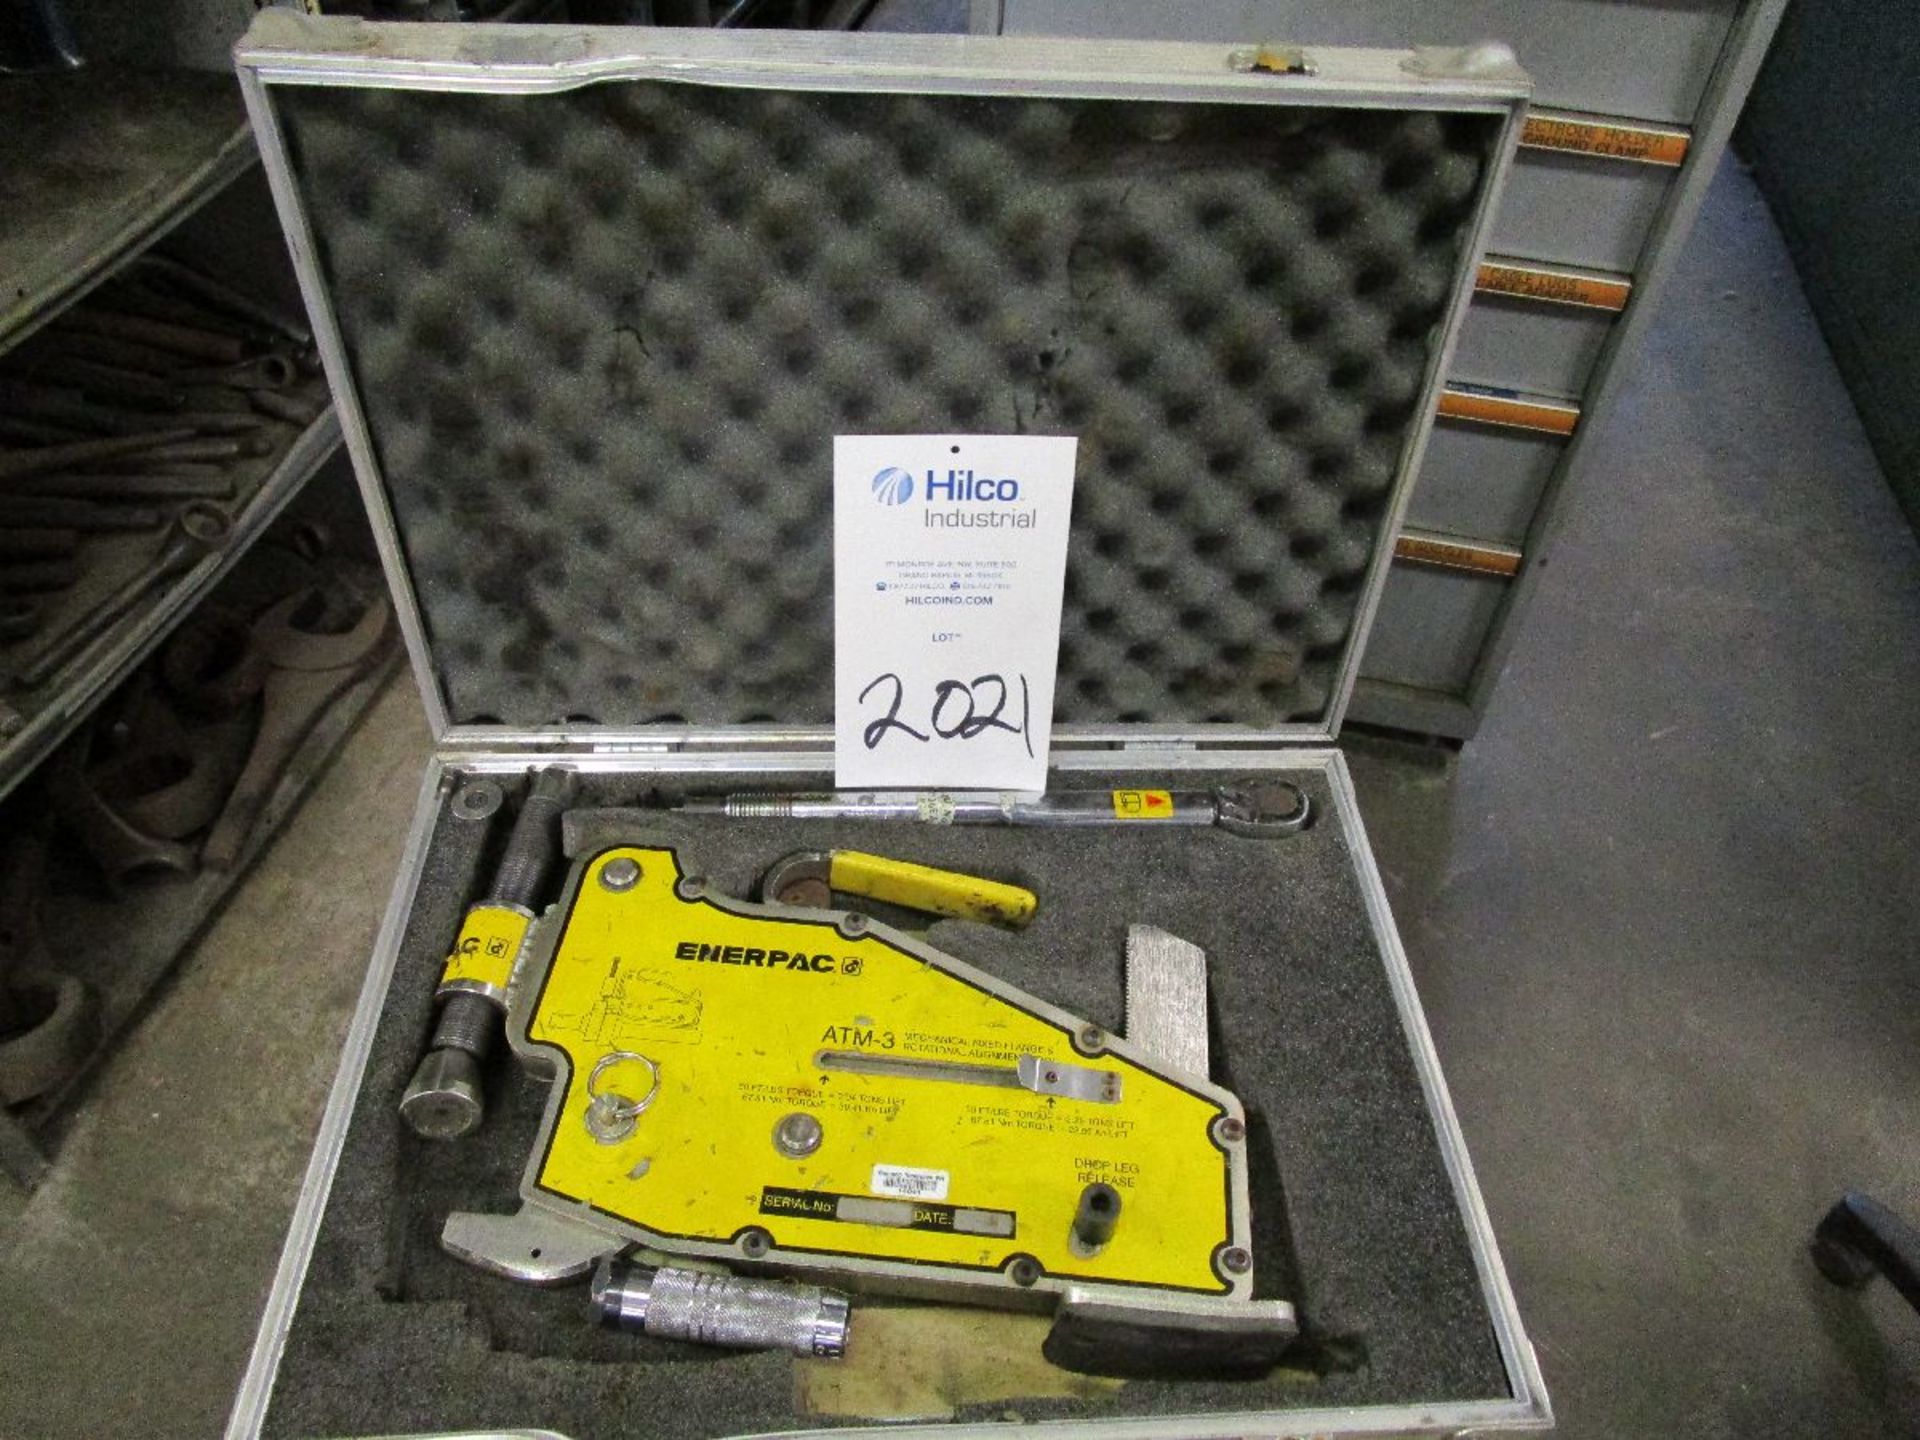 Enerpac Model ATM-3 Mechanical Fixed Flange Rotational Alignment Tool